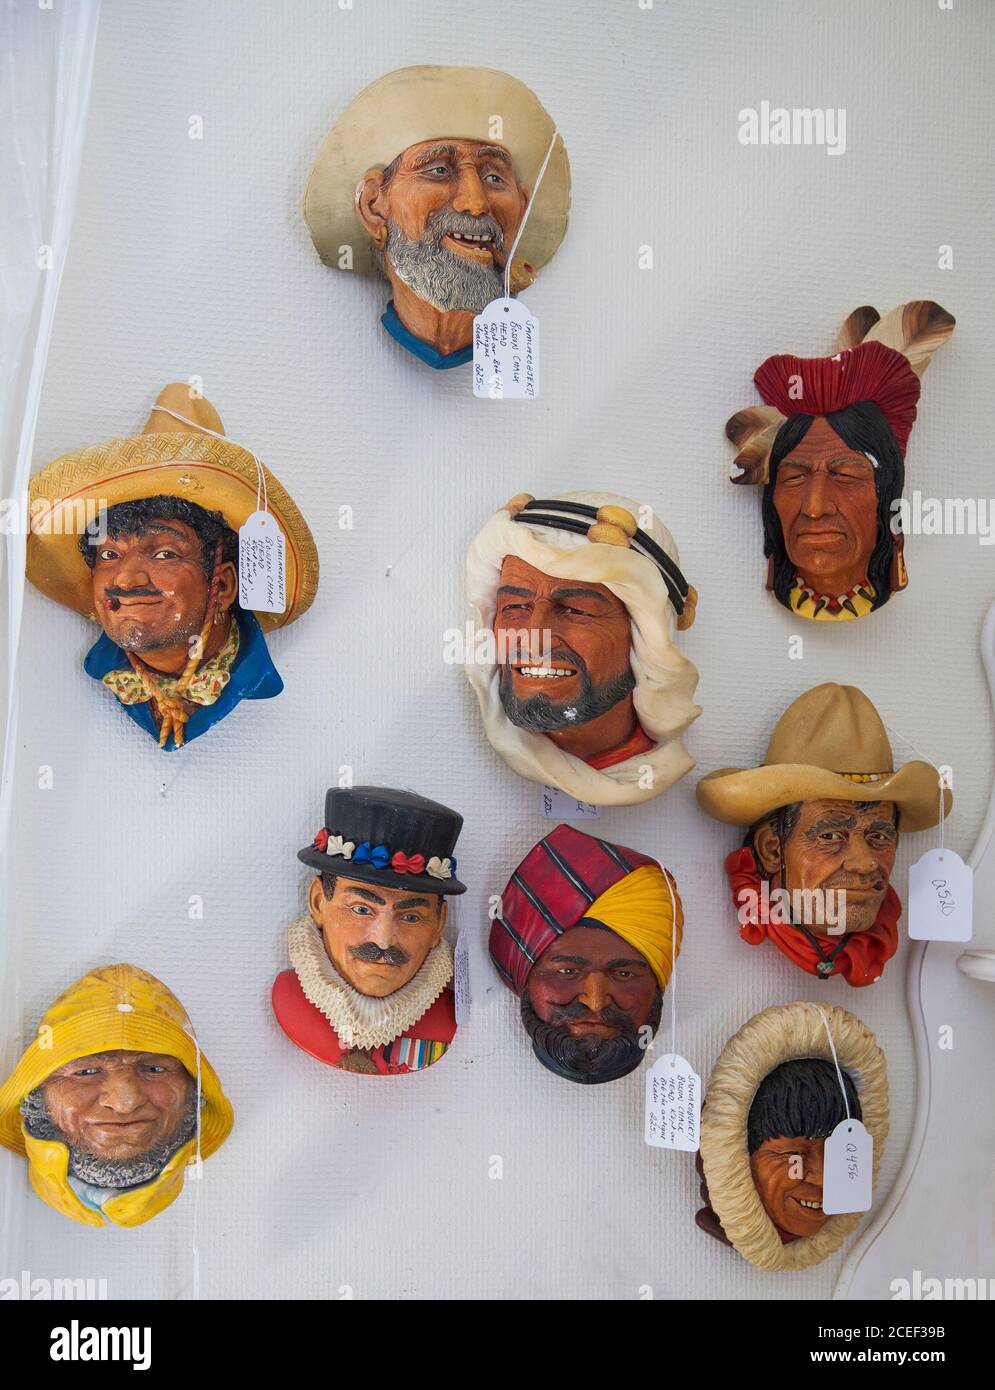 COLLECTS ITEMS in ceramics representing different faces with headdresses on wall Stock Photo